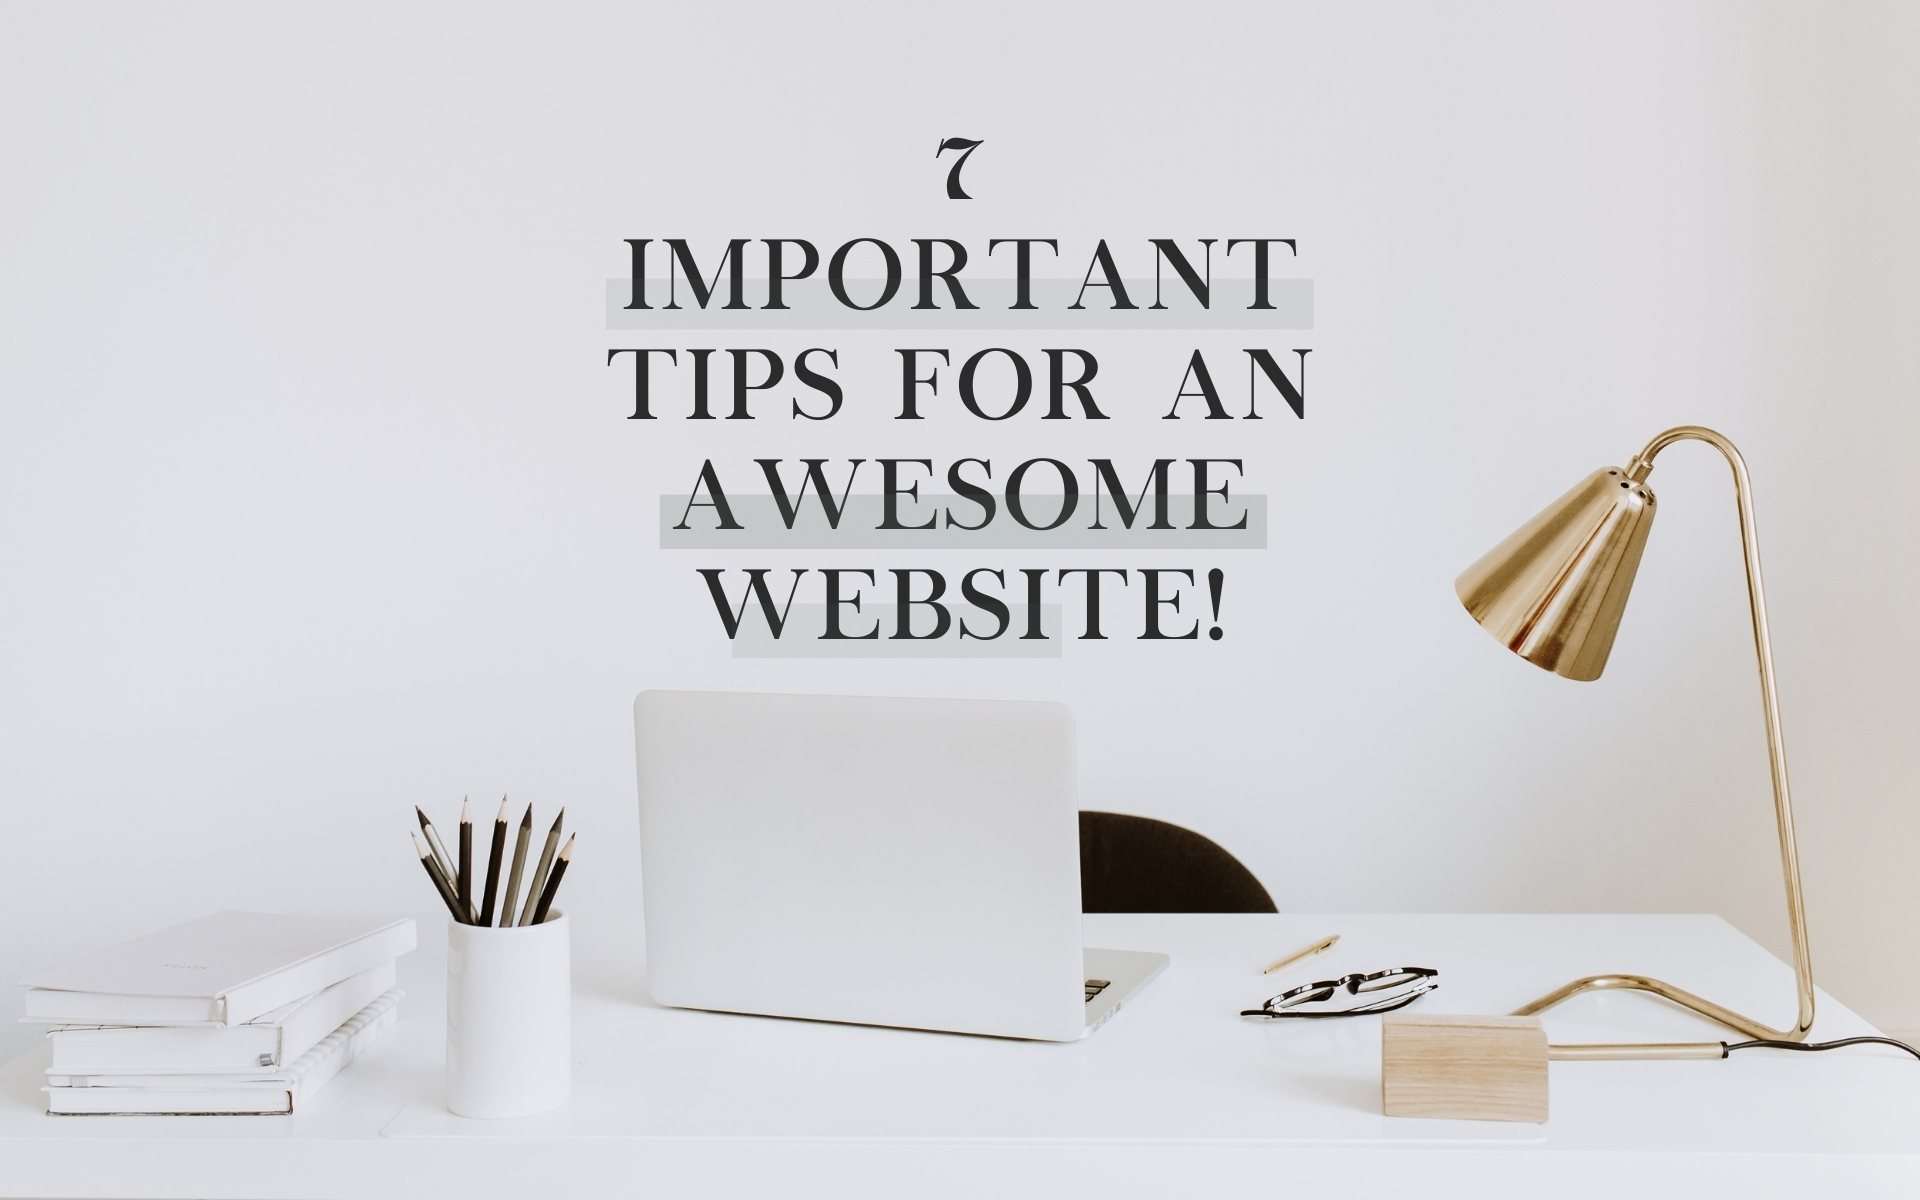 Seven important tips for an awesome website